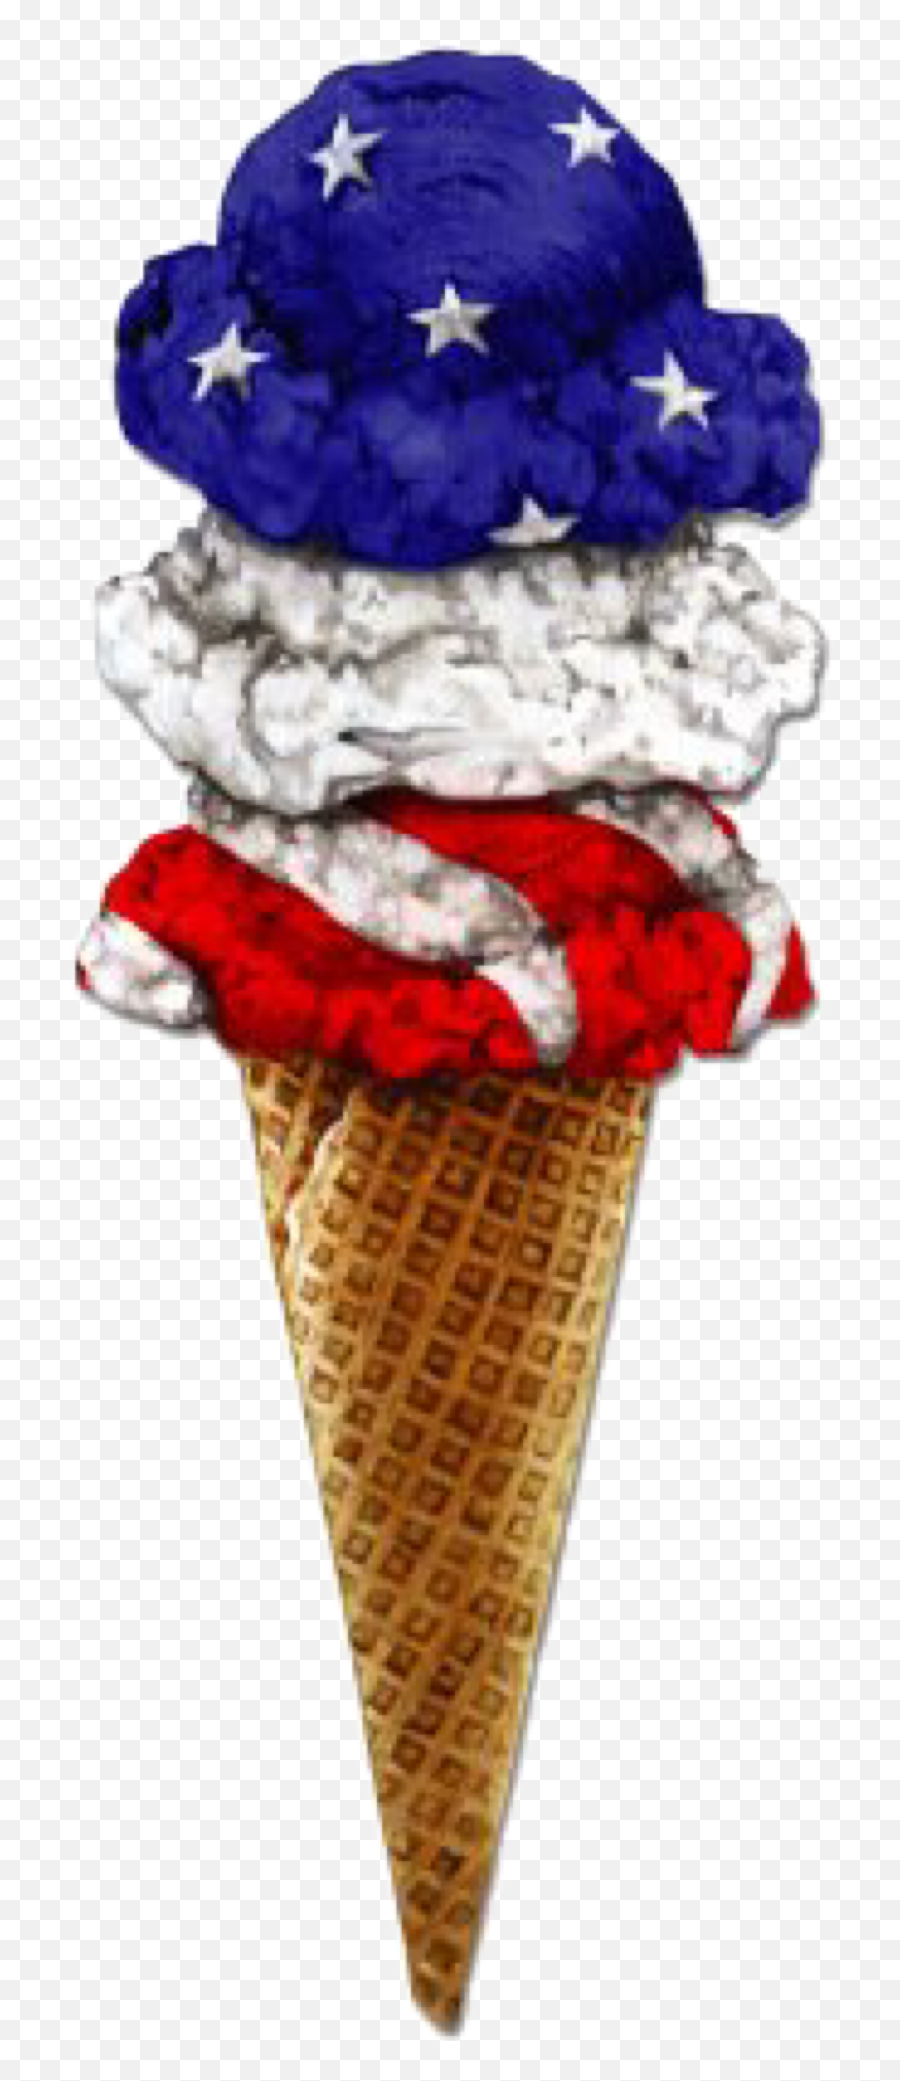 Largest Collection Of Free - Toedit Ice Cream Cone Stickers Red White And Blue Ice Cream Emoji,Ice Cream Cone Emoji